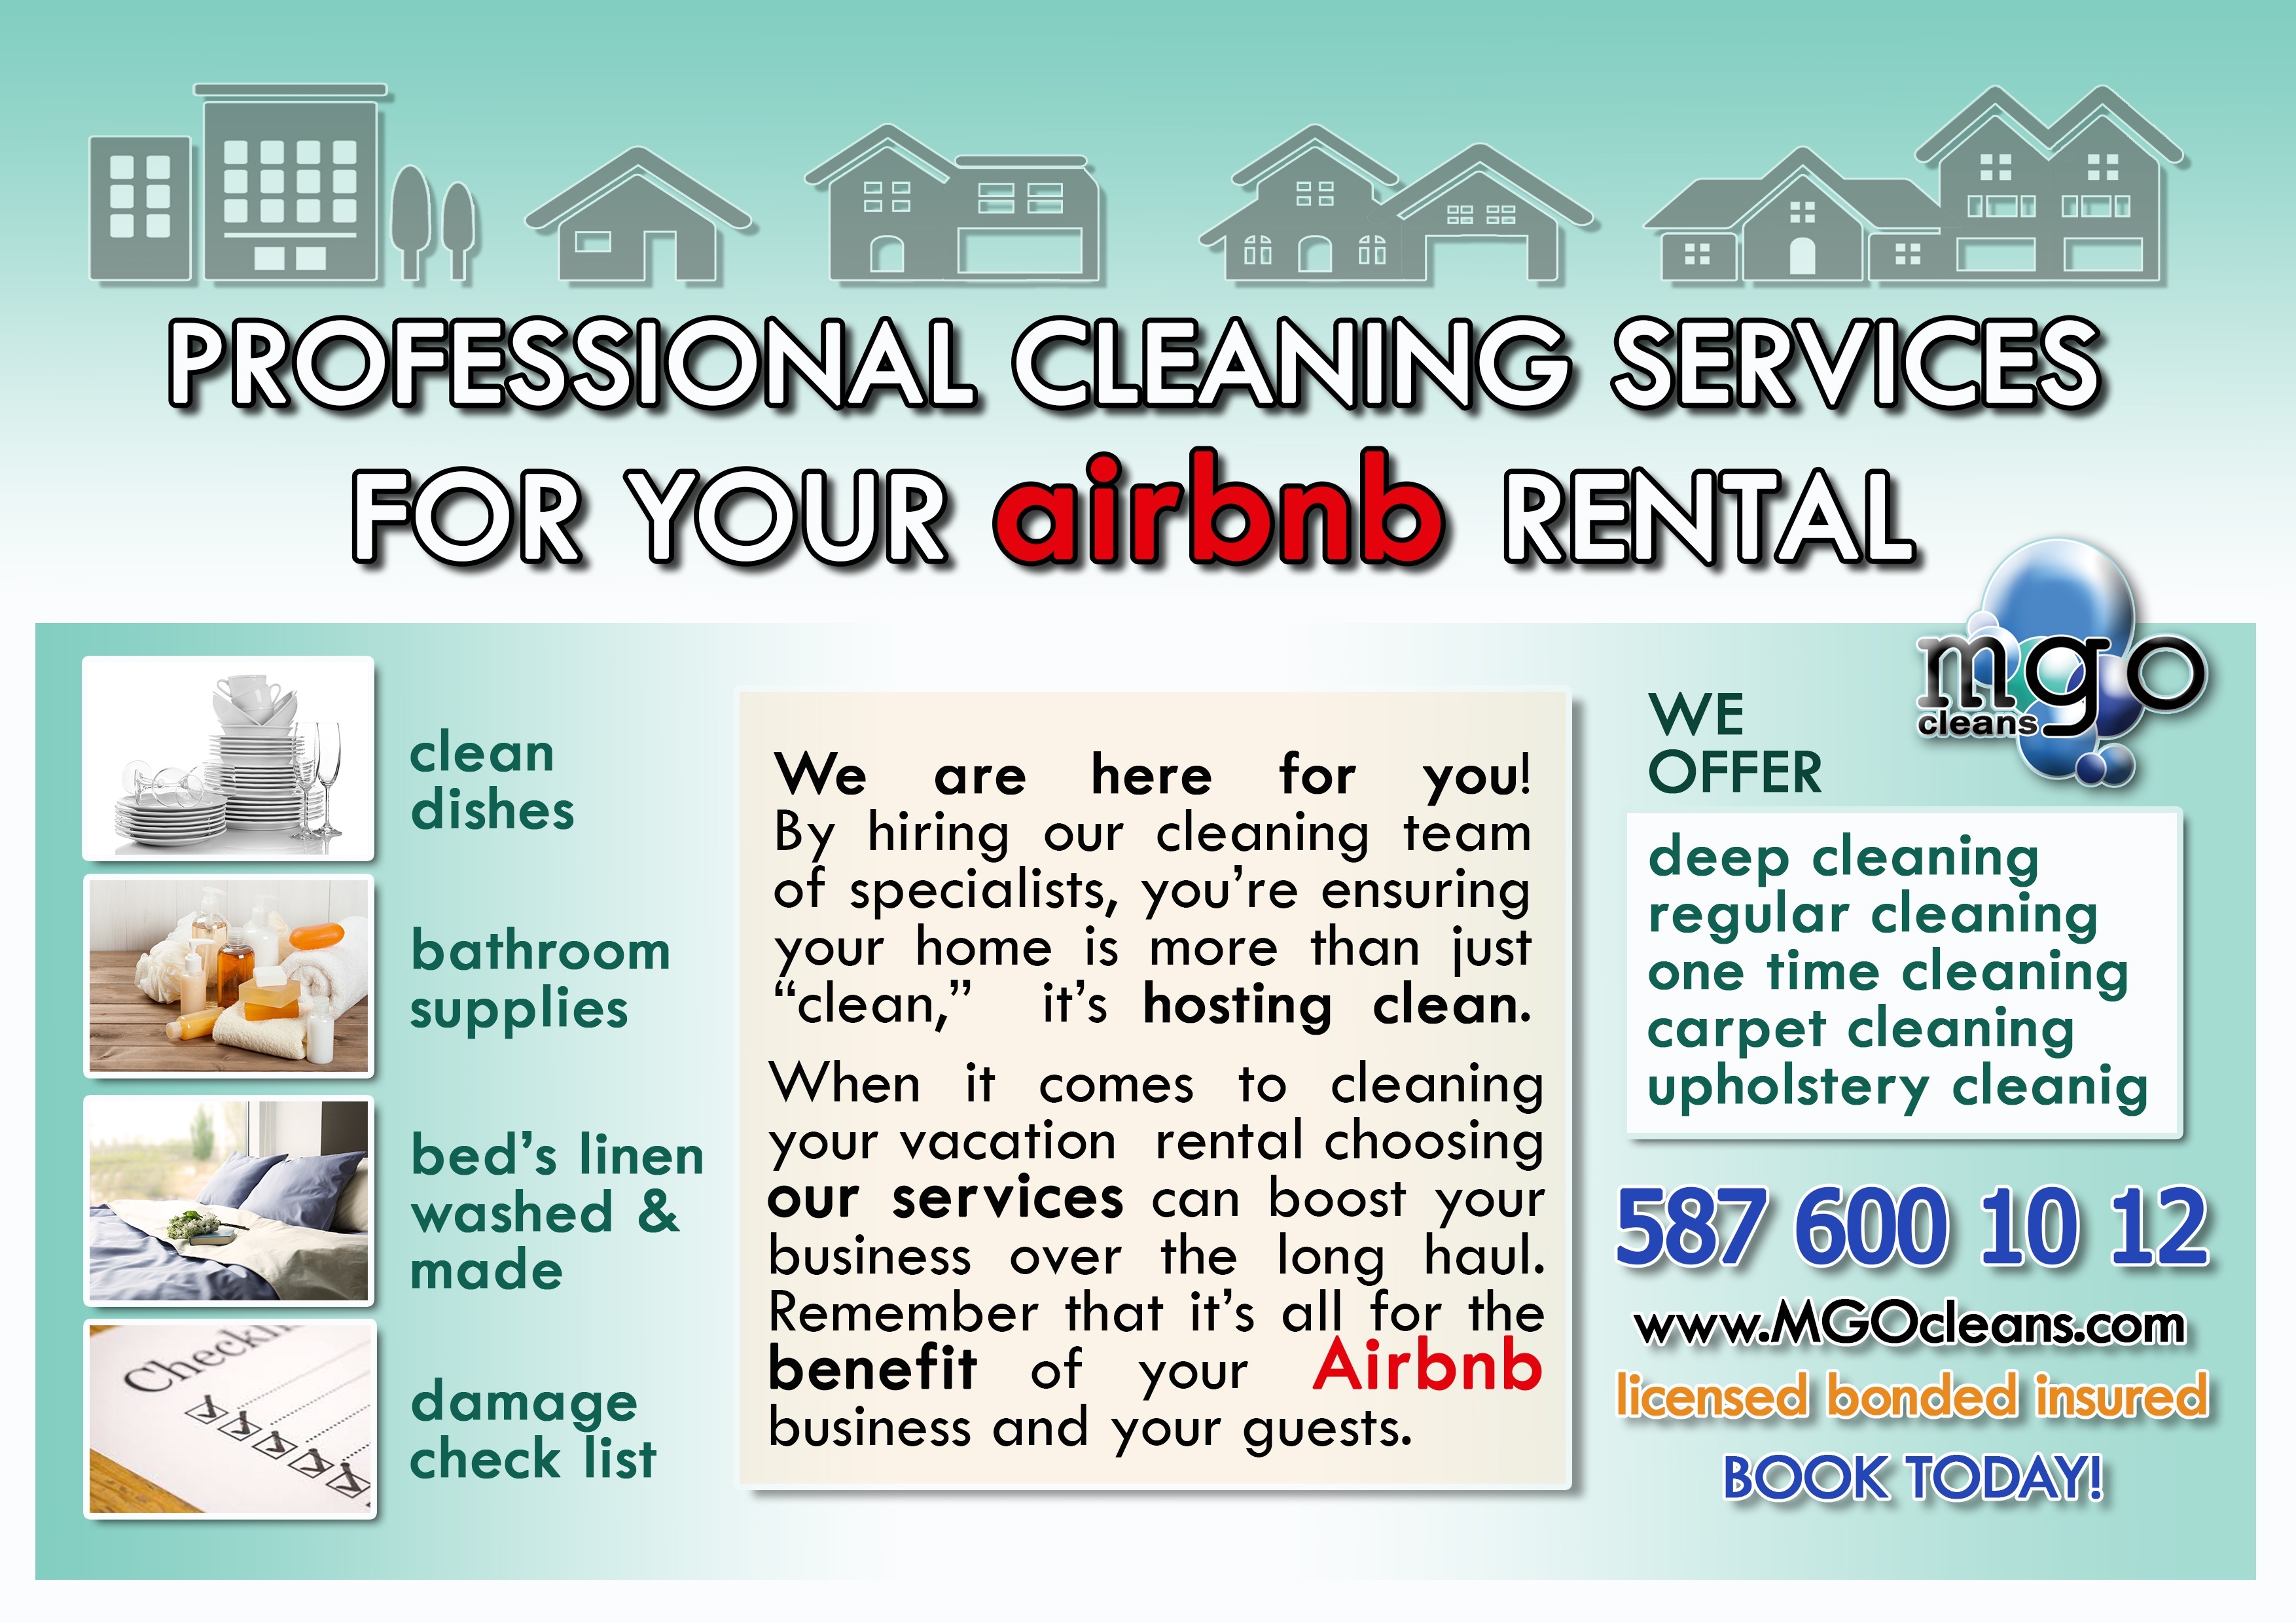 MGOcleans Air bnb Cleaning